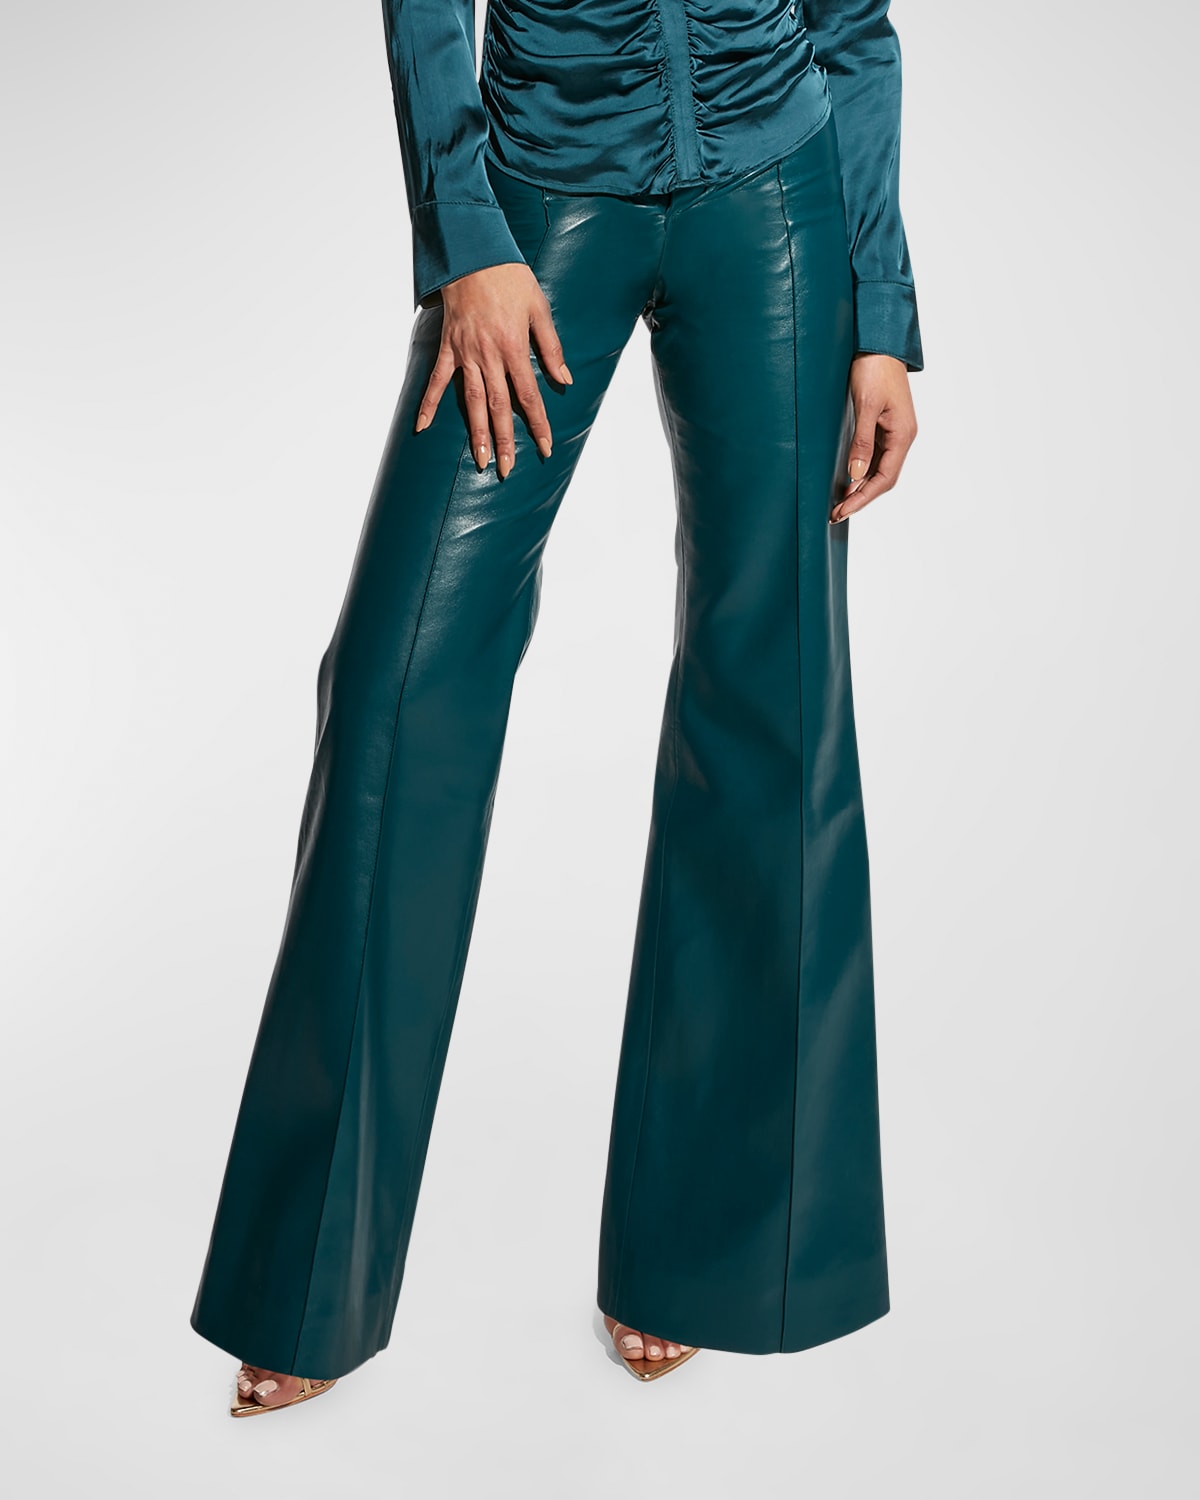 AGOLDE Recycled Leather Fitted '90s Pants Detox 26